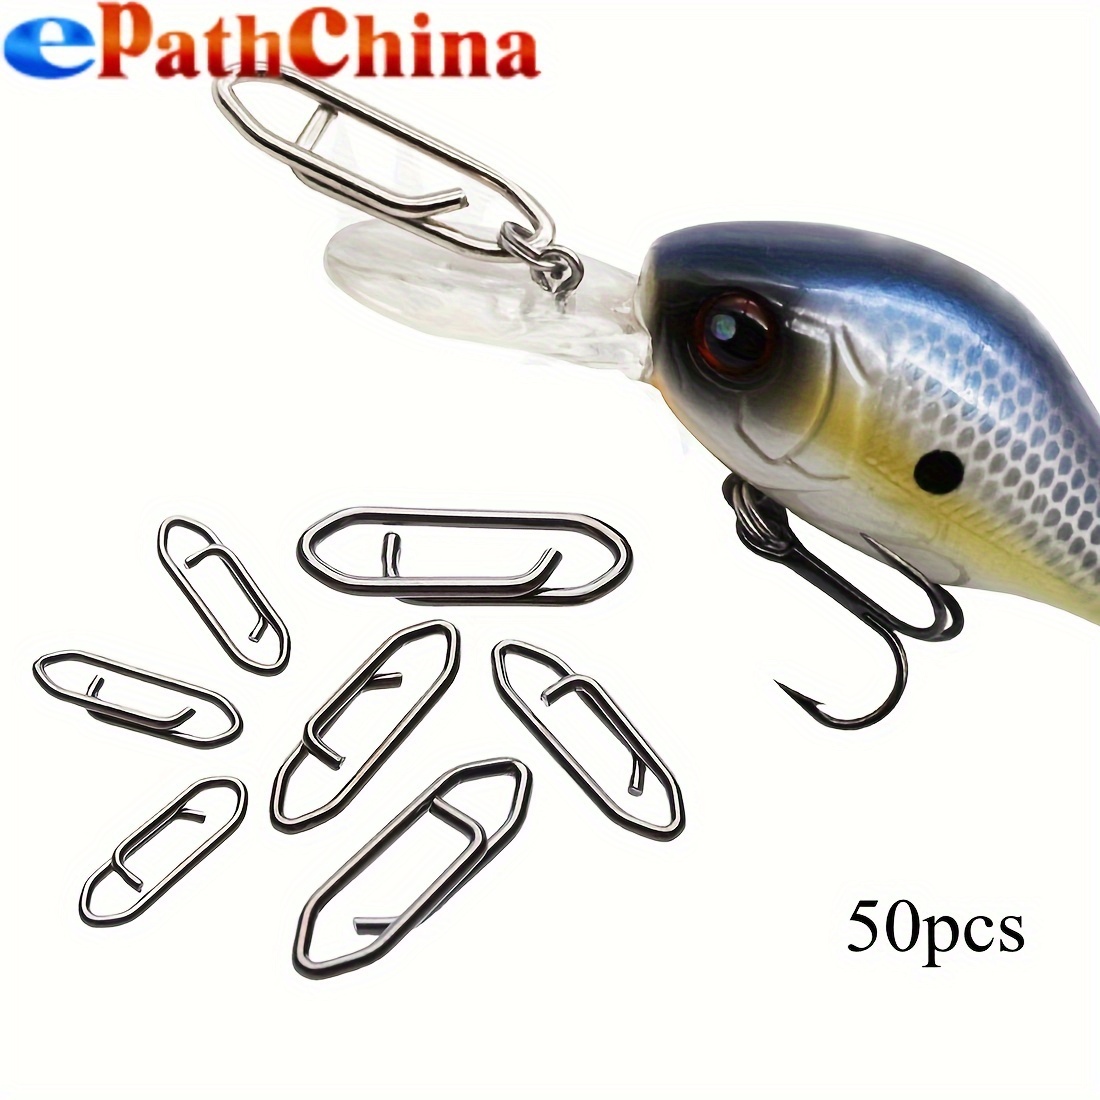 50pcs Fishing Accessories Small Fishing Clips Lure Snaps Portable Fishing  Clips Fishing Supply Outdoor Snap Clips Sturdy Fishing Clips Duo Lock Snap